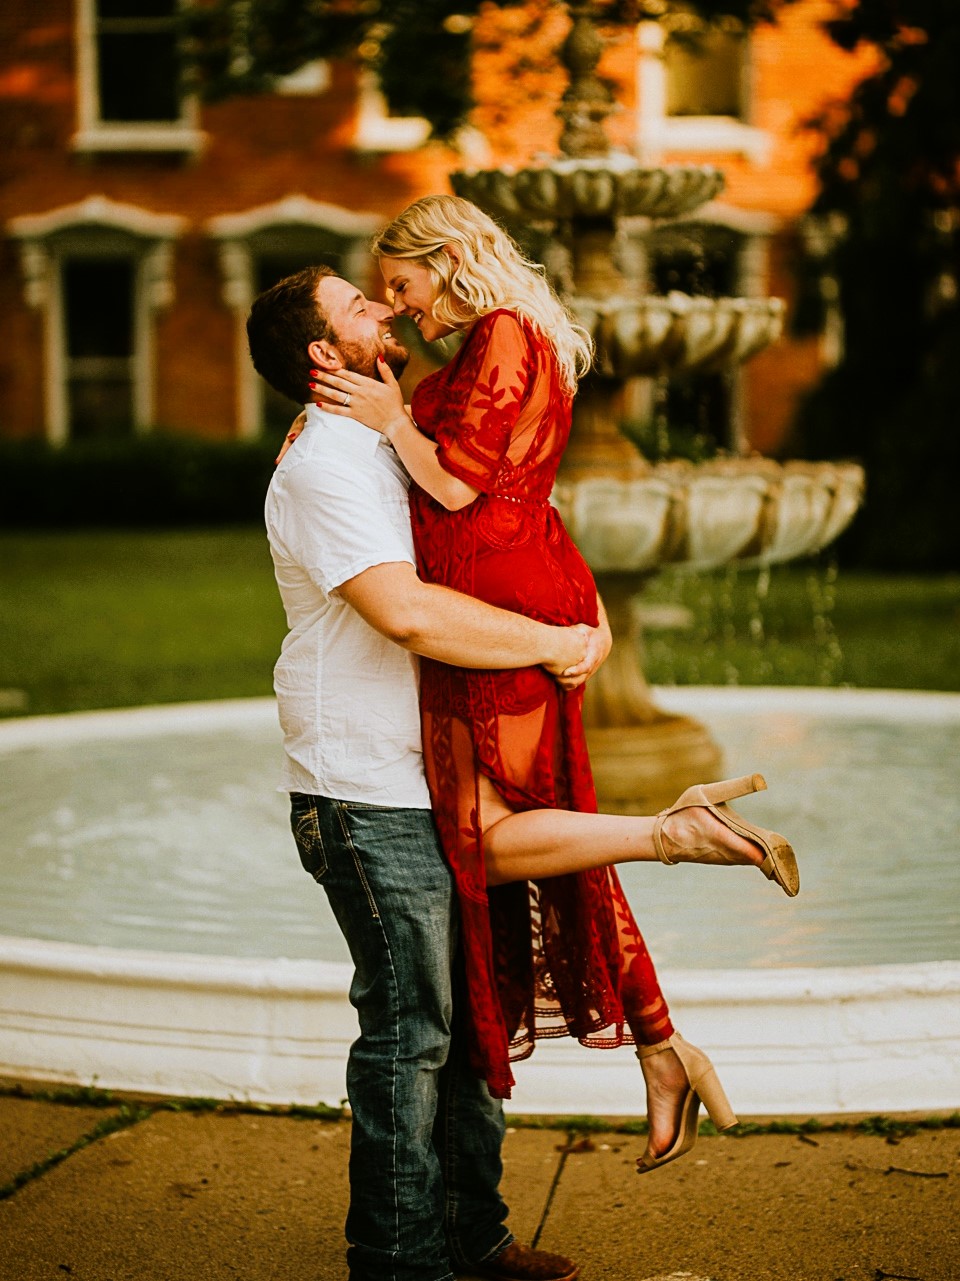 summer engagement photoshoot outfits with red boho dress